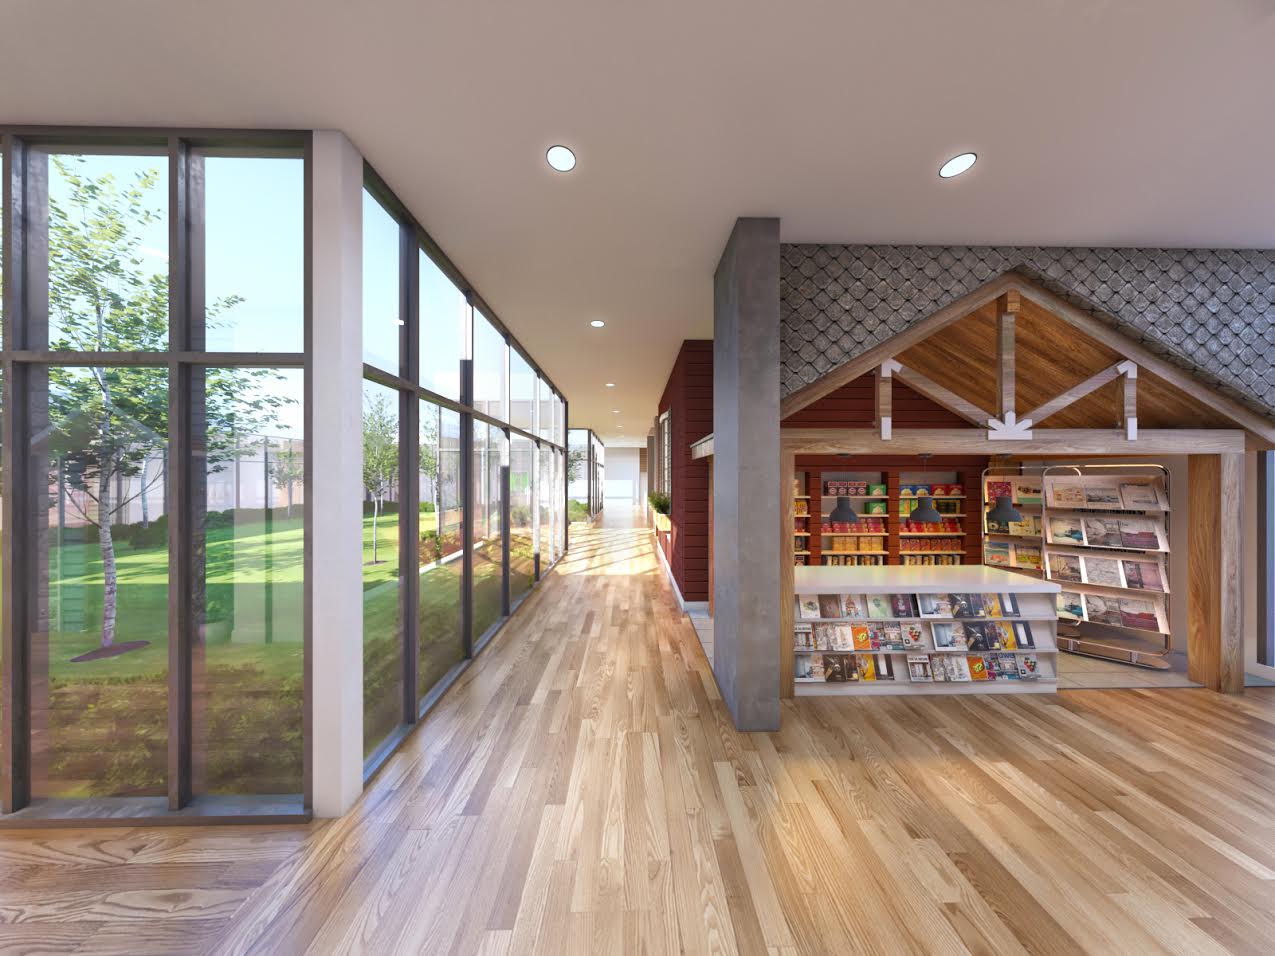 Kiosk in a dementia care community by van der King Design Group and Global Architects Inc.